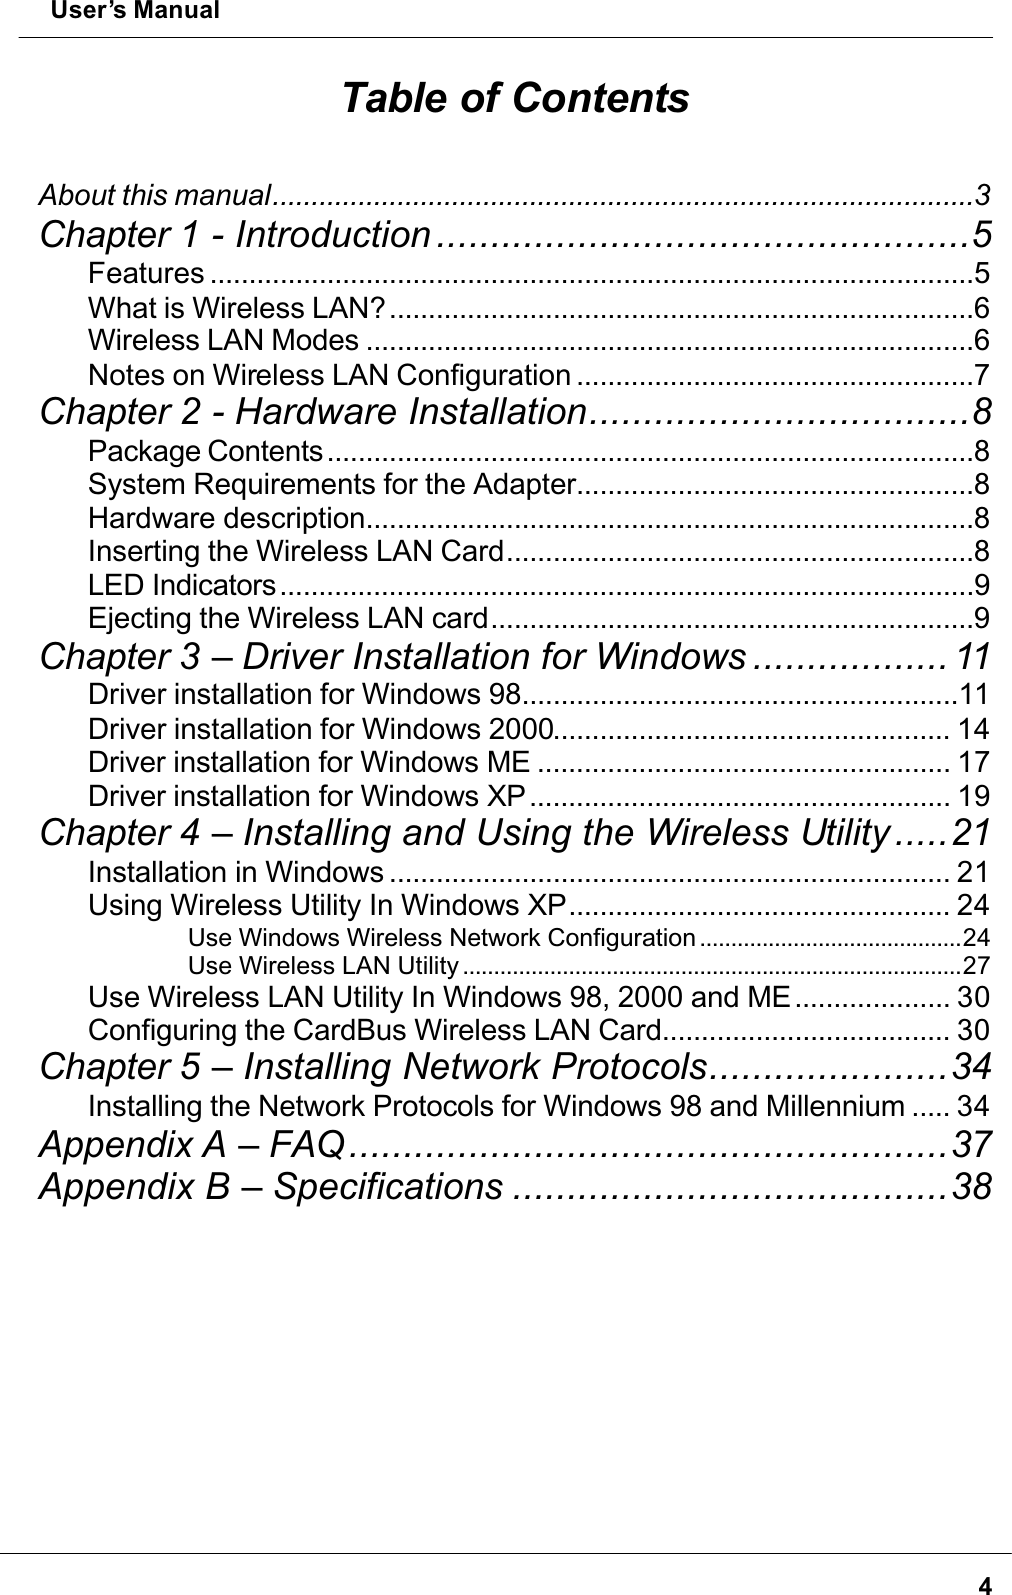  User’s Manual4Table of ContentsAbout this manual..........................................................................................3Chapter 1 - Introduction .................................................5Features ..................................................................................................5What is Wireless LAN?...........................................................................6Wireless LAN Modes ..............................................................................6Notes on Wireless LAN Configuration ...................................................7Chapter 2 - Hardware Installation...................................8Package Contents...................................................................................8System Requirements for the Adapter...................................................8Hardware description..............................................................................8Inserting the Wireless LAN Card............................................................8LED Indicators.........................................................................................9Ejecting the Wireless LAN card..............................................................9Chapter 3 – Driver Installation for Windows .................. 11Driver installation for Windows 98........................................................11Driver installation for Windows 2000................................................... 14Driver installation for Windows ME ..................................................... 17Driver installation for Windows XP...................................................... 19Chapter 4 – Installing and Using the Wireless Utility .....21Installation in Windows ........................................................................ 21Using Wireless Utility In Windows XP................................................. 24Use Windows Wireless Network Configuration ..........................................24Use Wireless LAN Utility ................................................................................27Use Wireless LAN Utility In Windows 98, 2000 and ME.................... 30Configuring the CardBus Wireless LAN Card..................................... 30Chapter 5 – Installing Network Protocols......................34Installing the Network Protocols for Windows 98 and Millennium ..... 34Appendix A – FAQ.......................................................37Appendix B – Specifications ........................................38